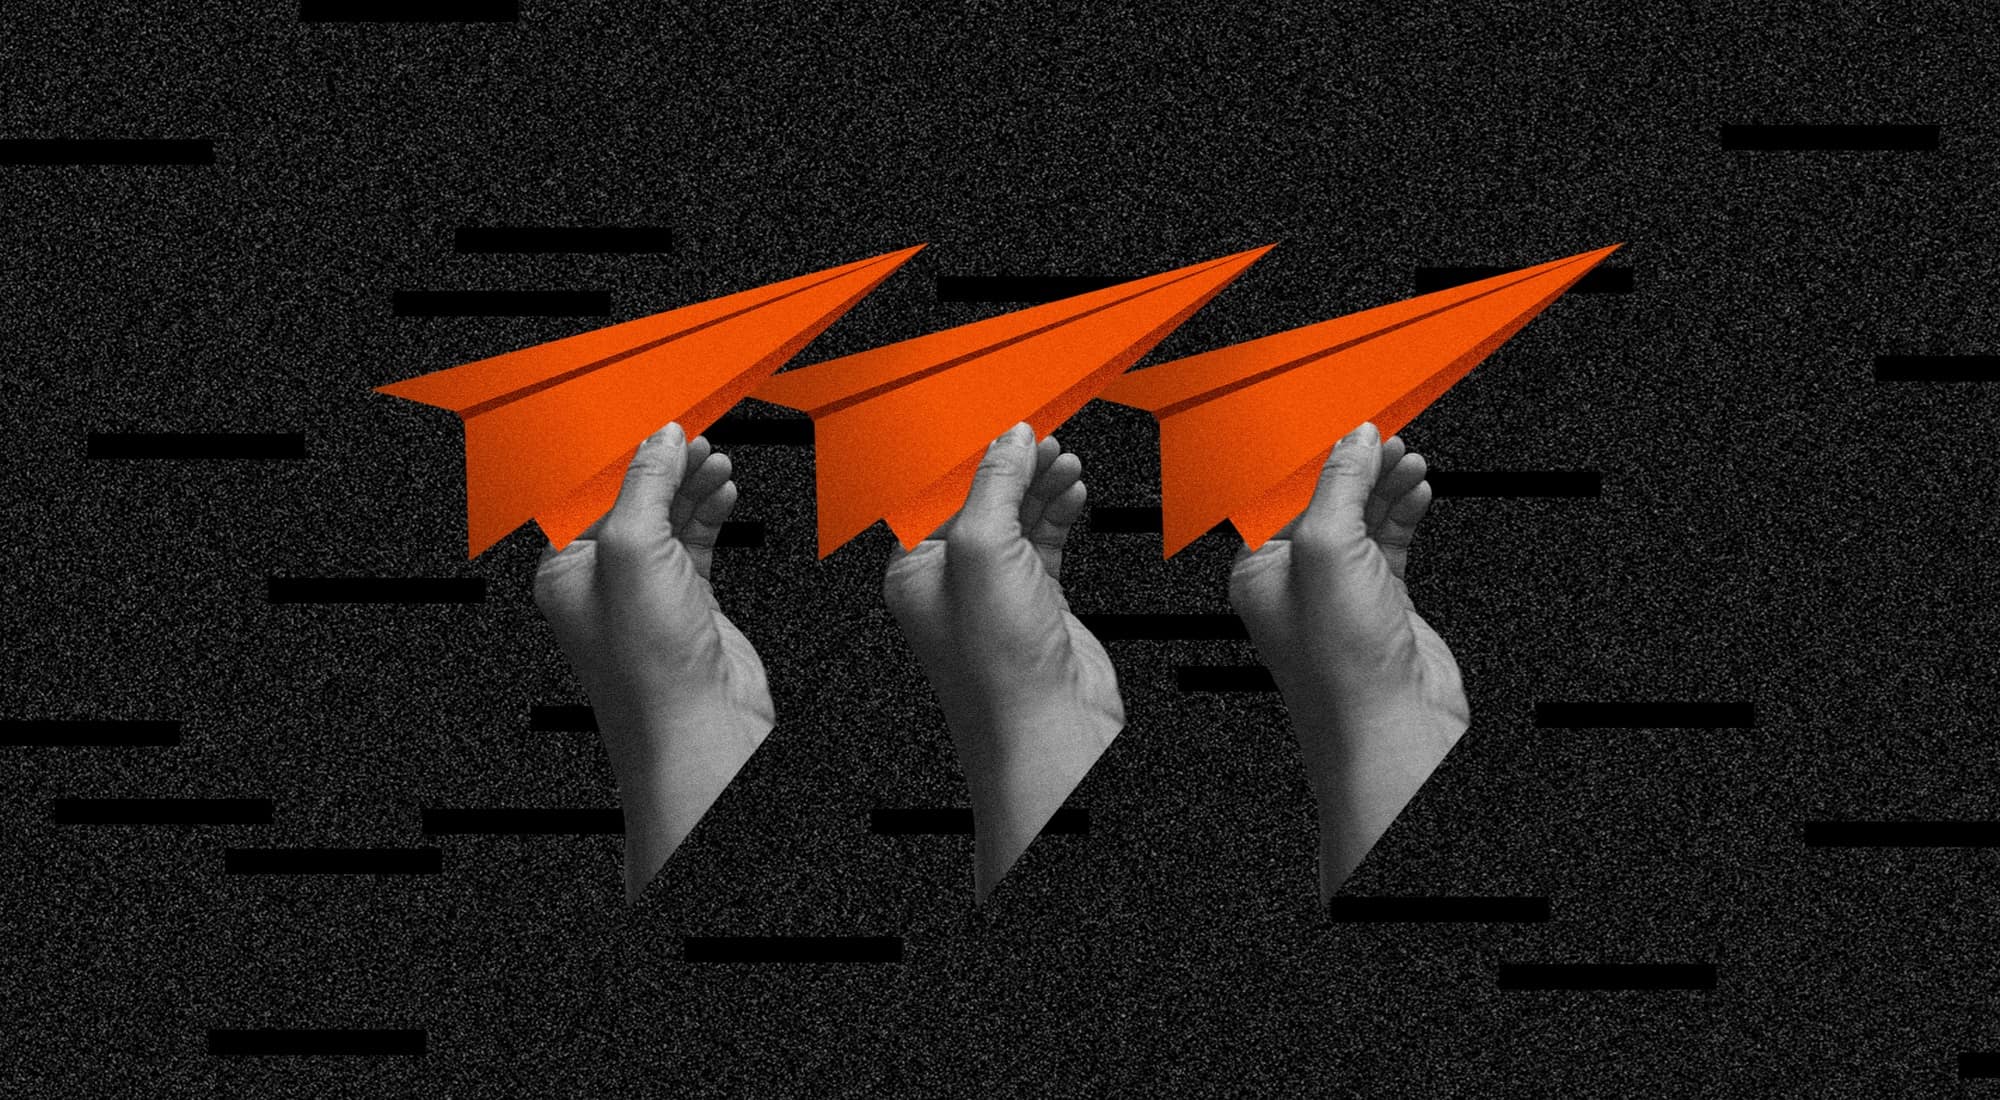 Three disembodied hands poised to throw orange paper airplanes.